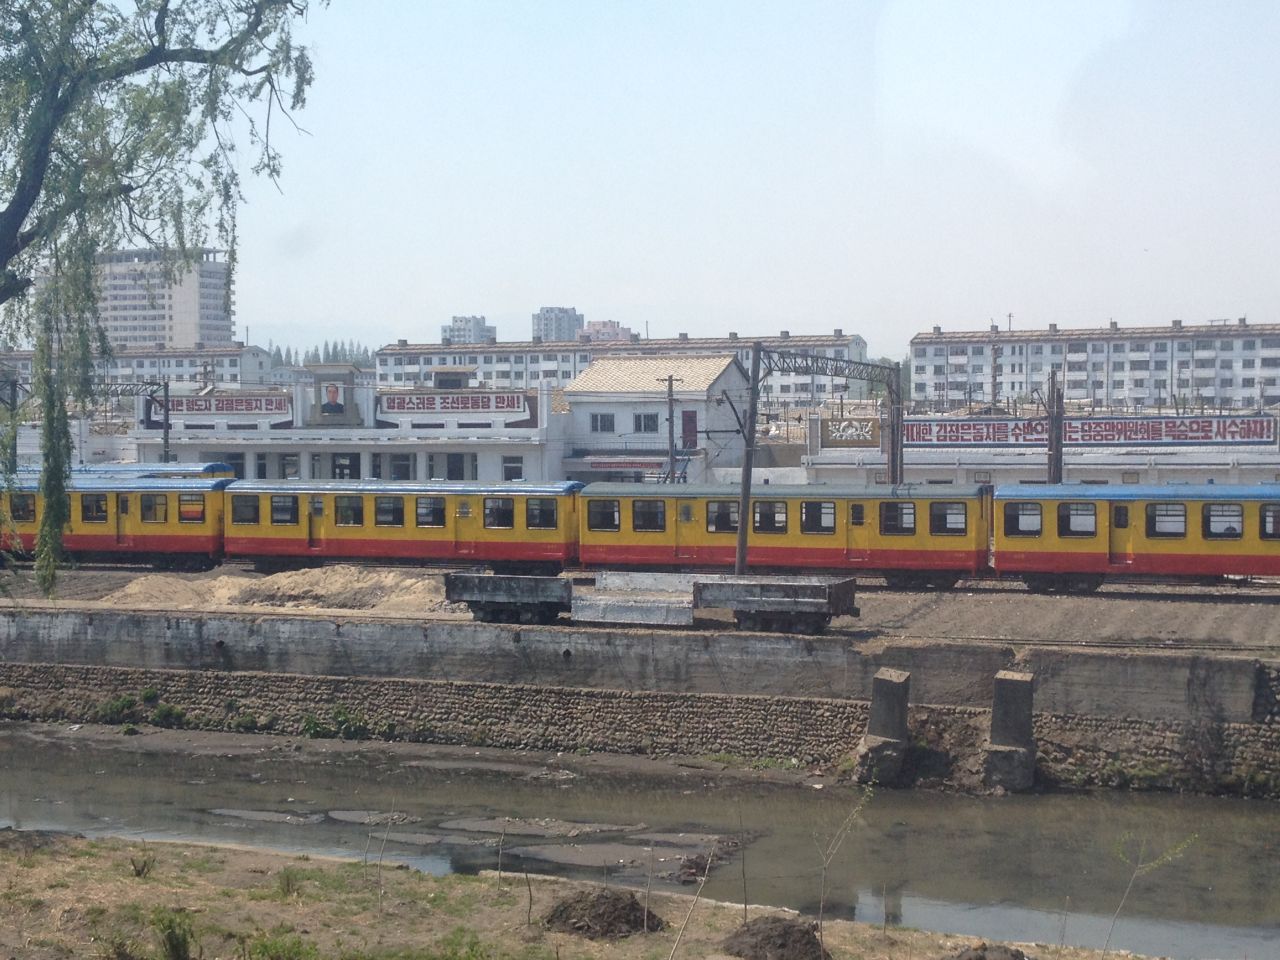 During Koryo's first train tour, last year, the group rode past this narrow gauge train. Its carriages were once used in the Pyongyang Metro.